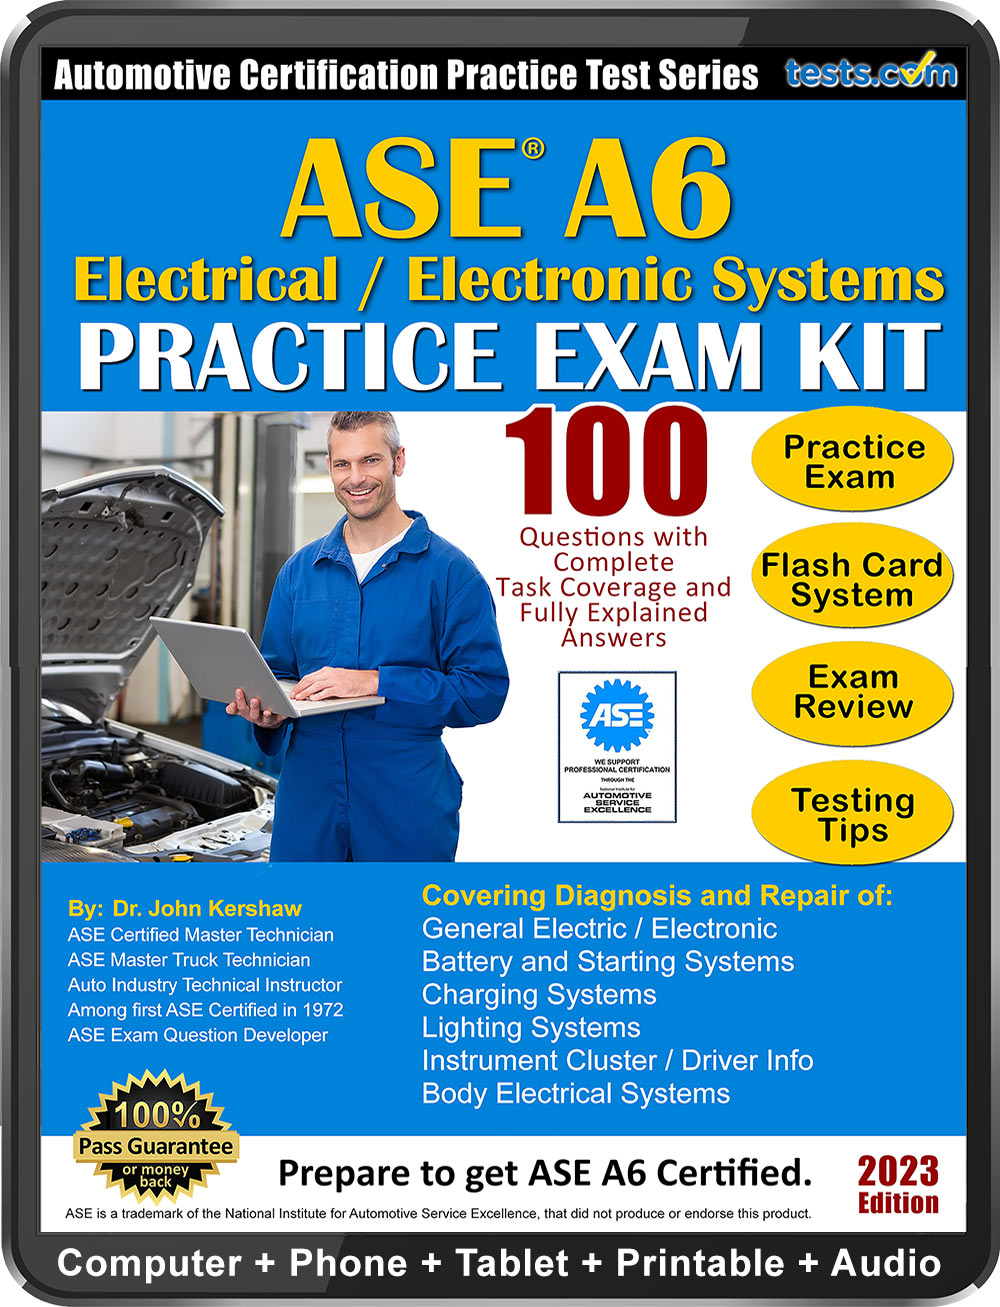 ASE A6 Practice Test